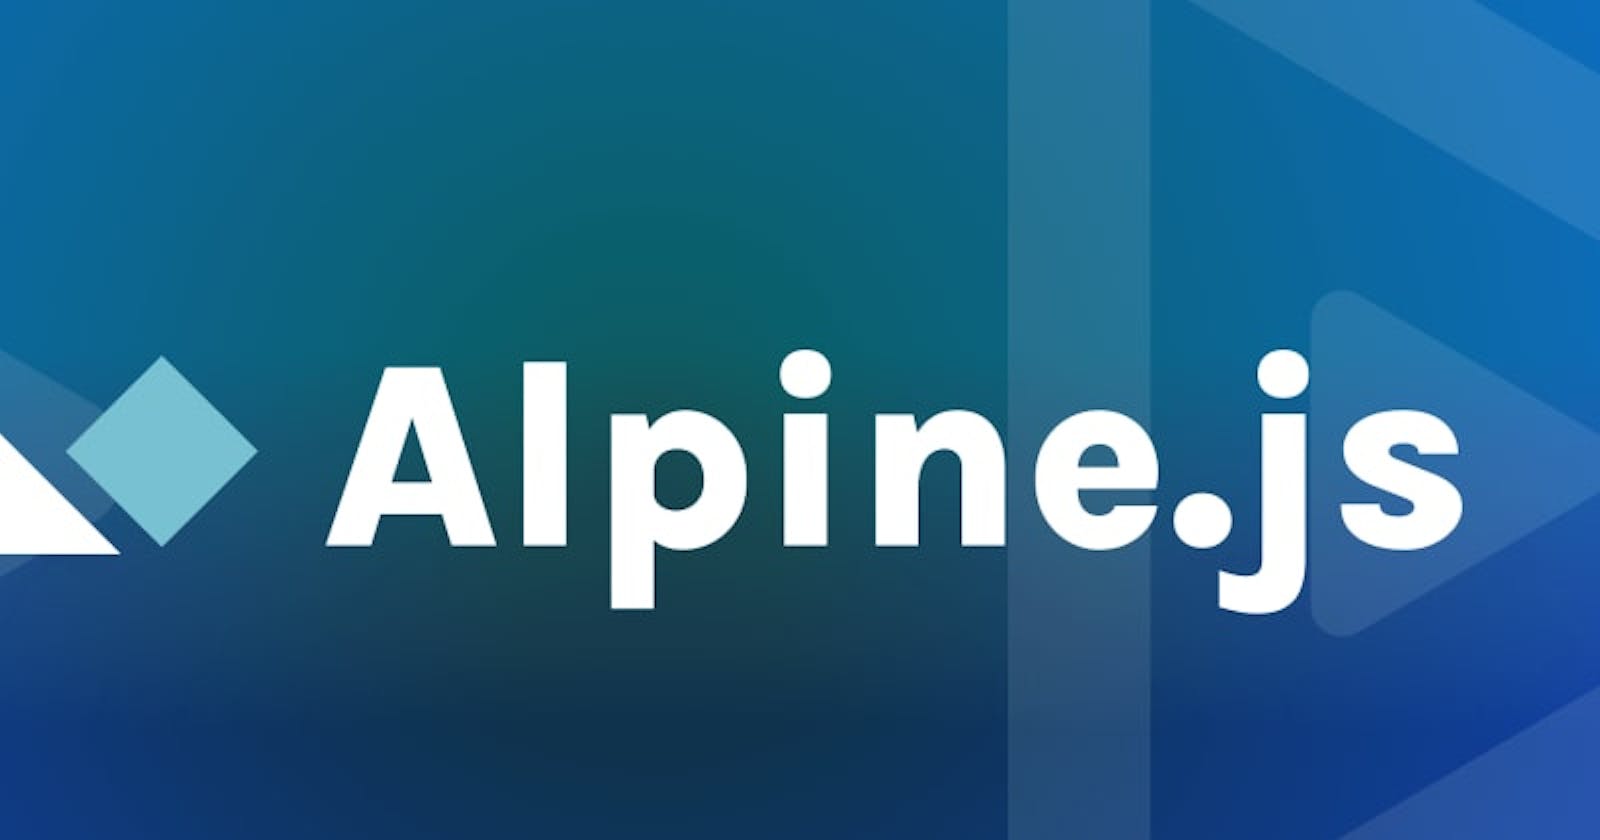 Getting started with Alpine.js